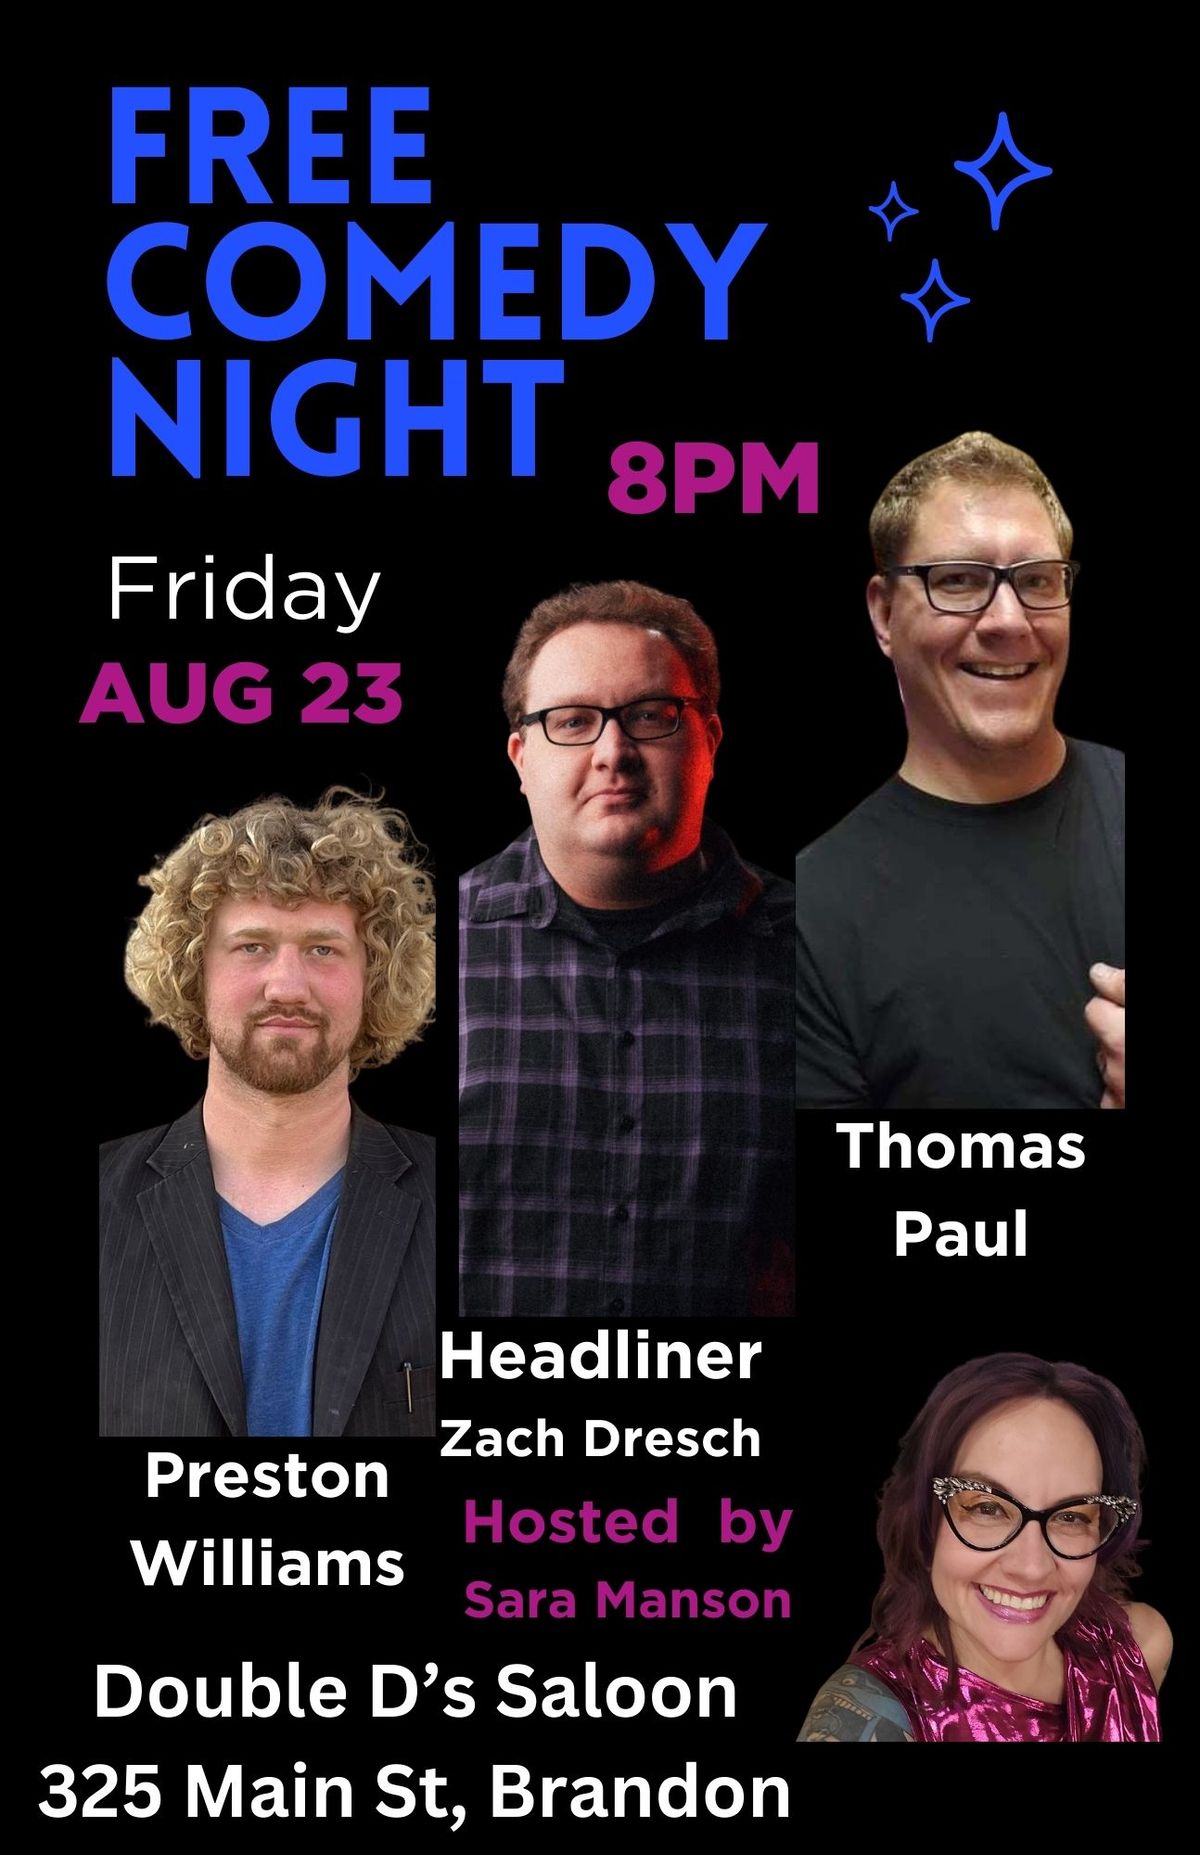 FREE Friday Night Comedy with Zach Dresch at The Double D!